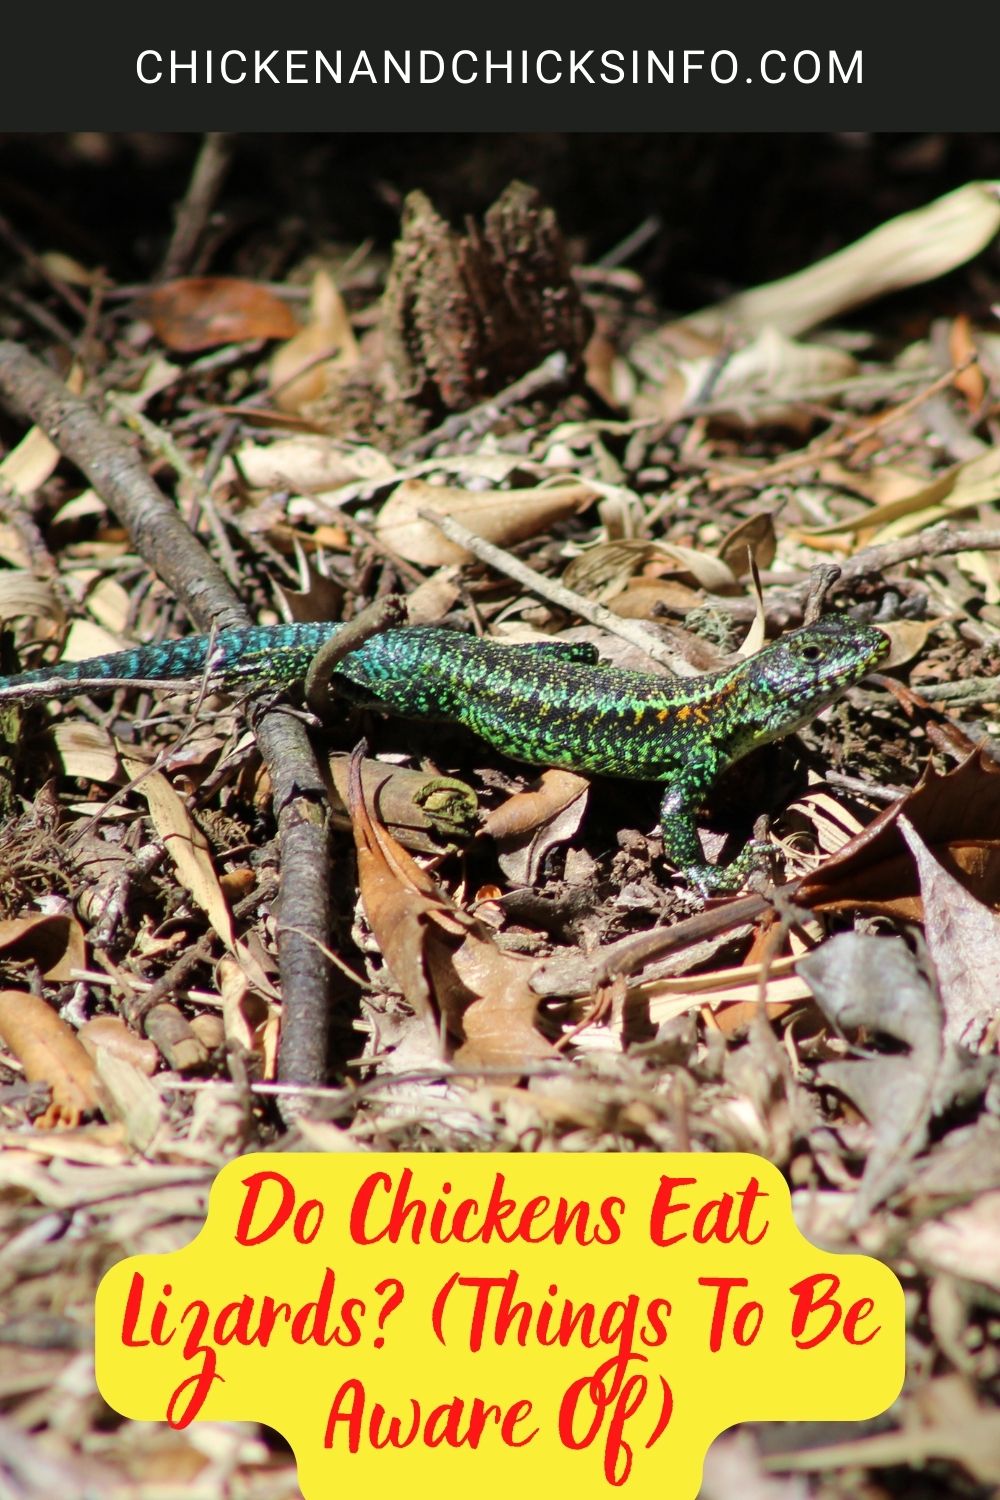 Do Chickens Eat Lizards? (Things To Be Aware Of) poster.
